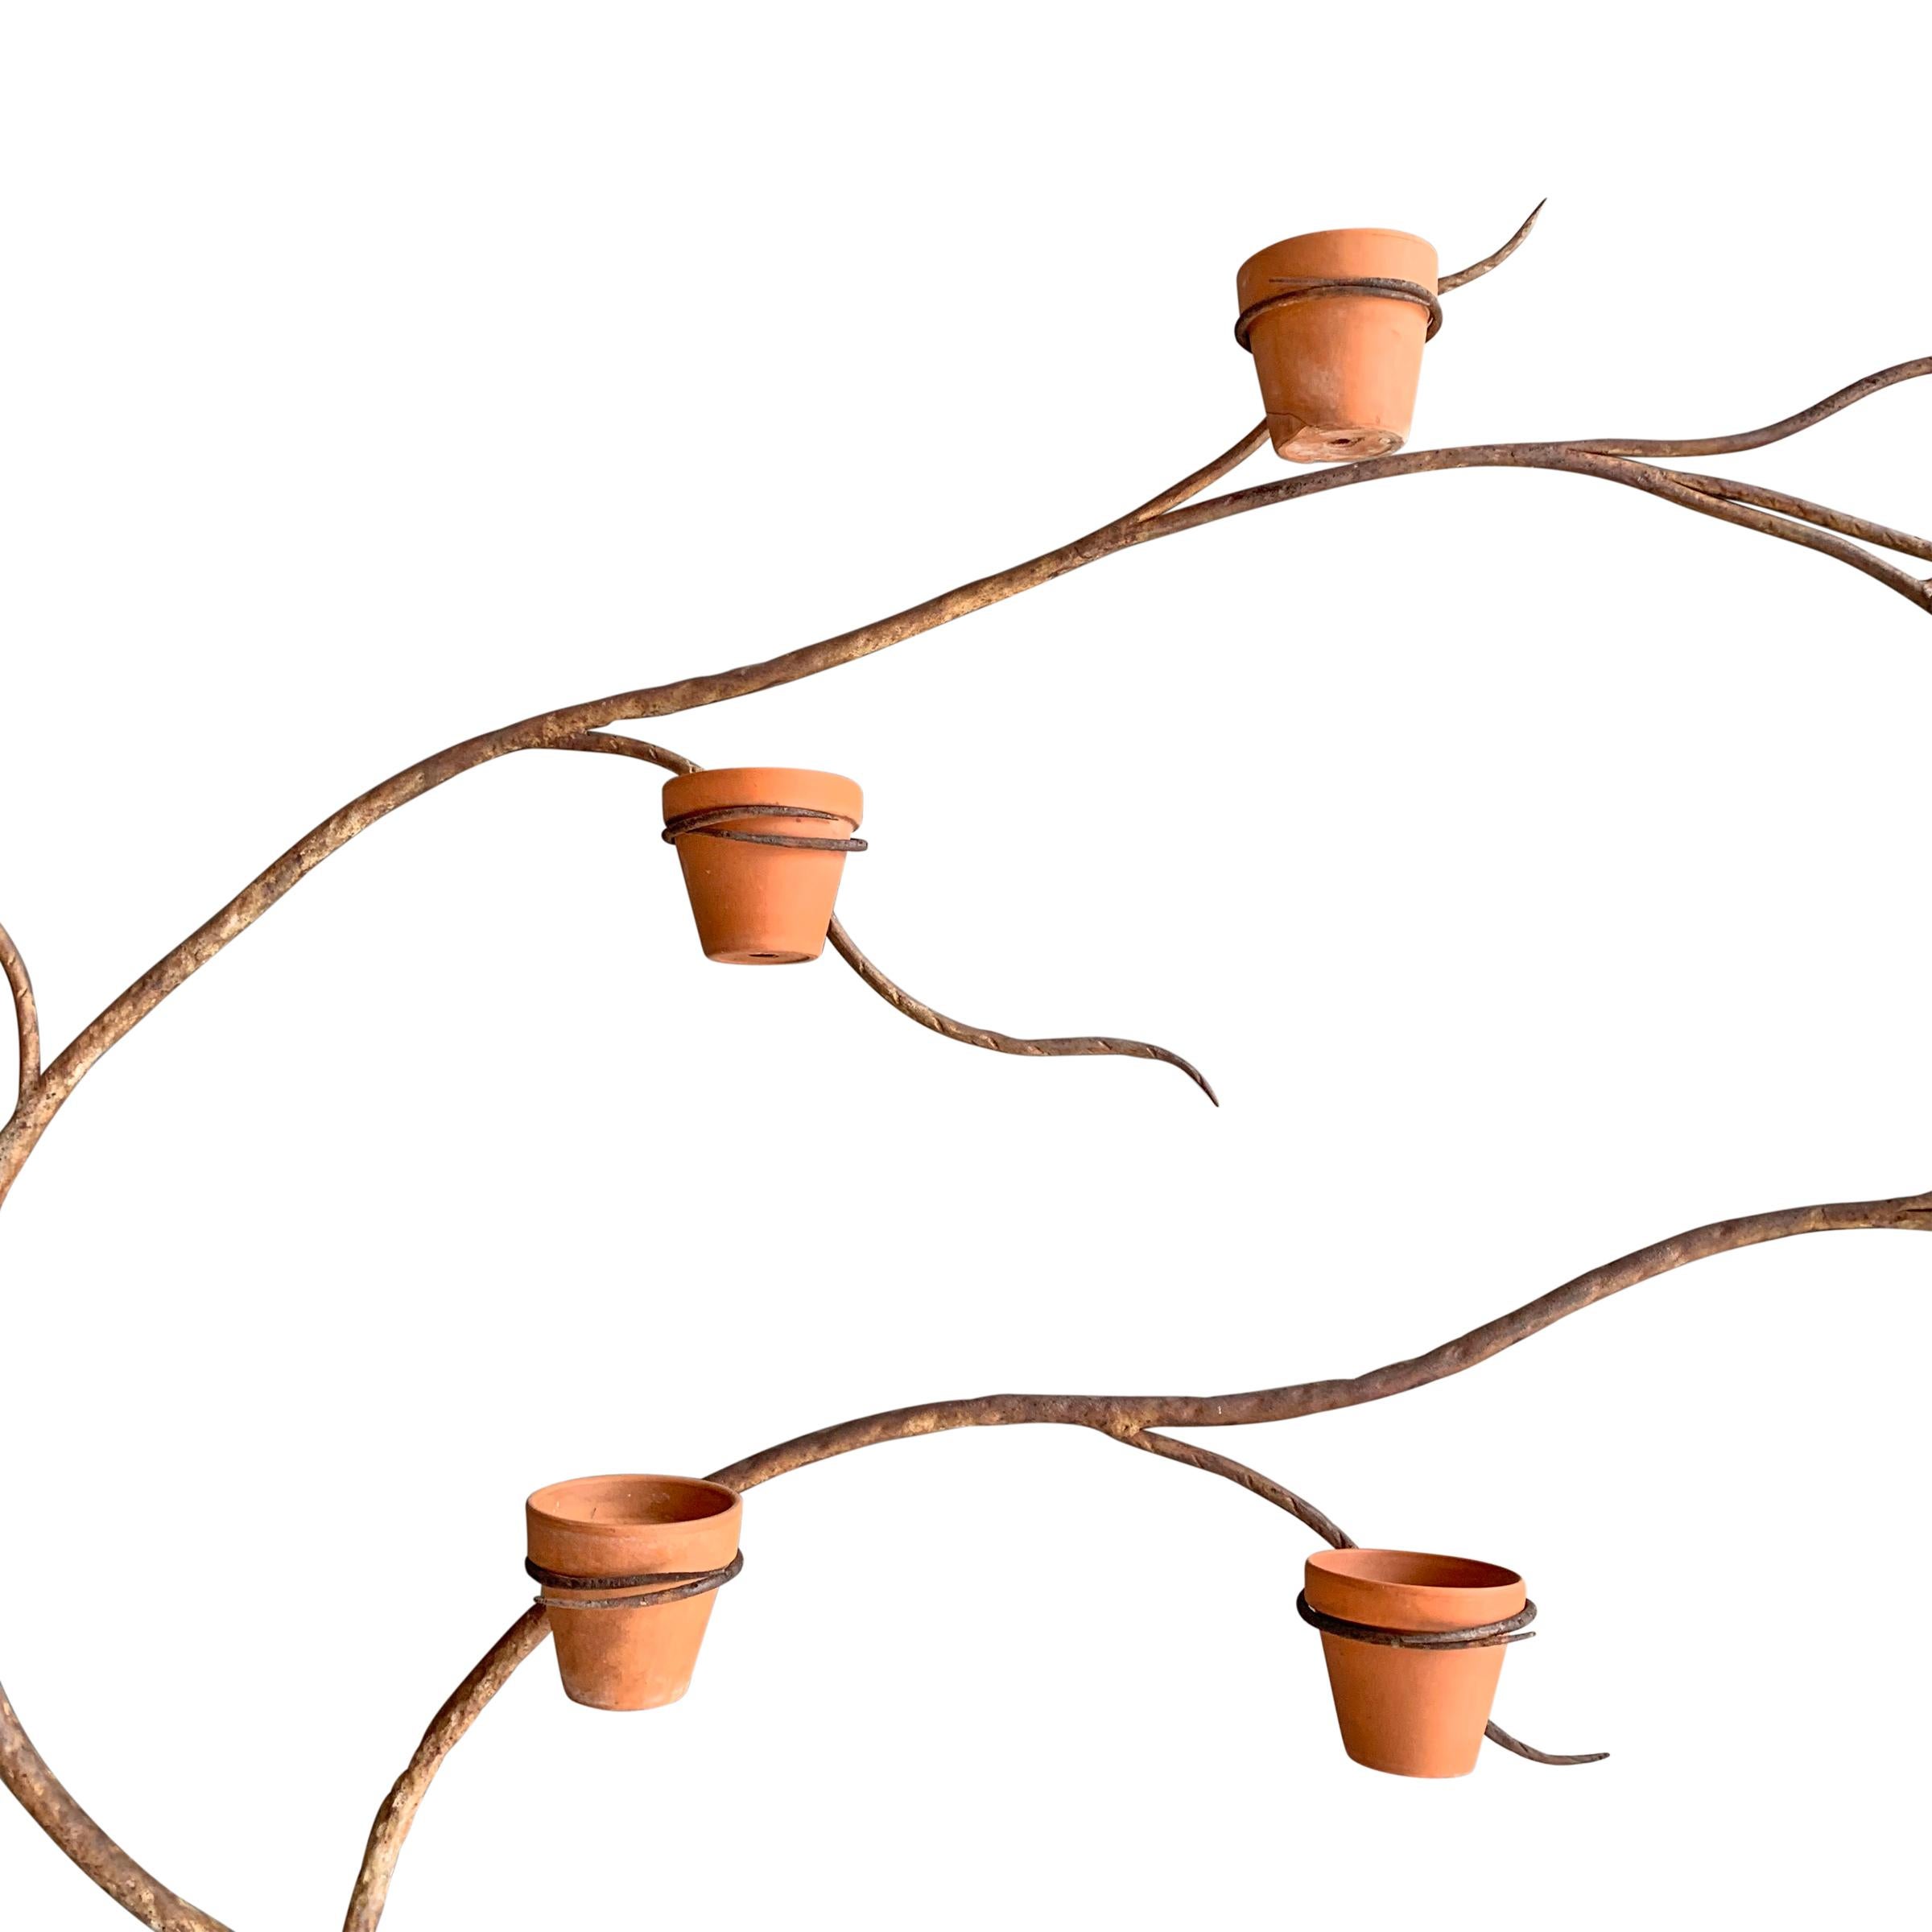 A incredible and whimsical early 20th century French artist-made wrought iron espalier planter with twenty-two rings that hold four inch terracotta pots. This piece was completely handmade and shows signs of a metalsmith's hand. It's composed of two